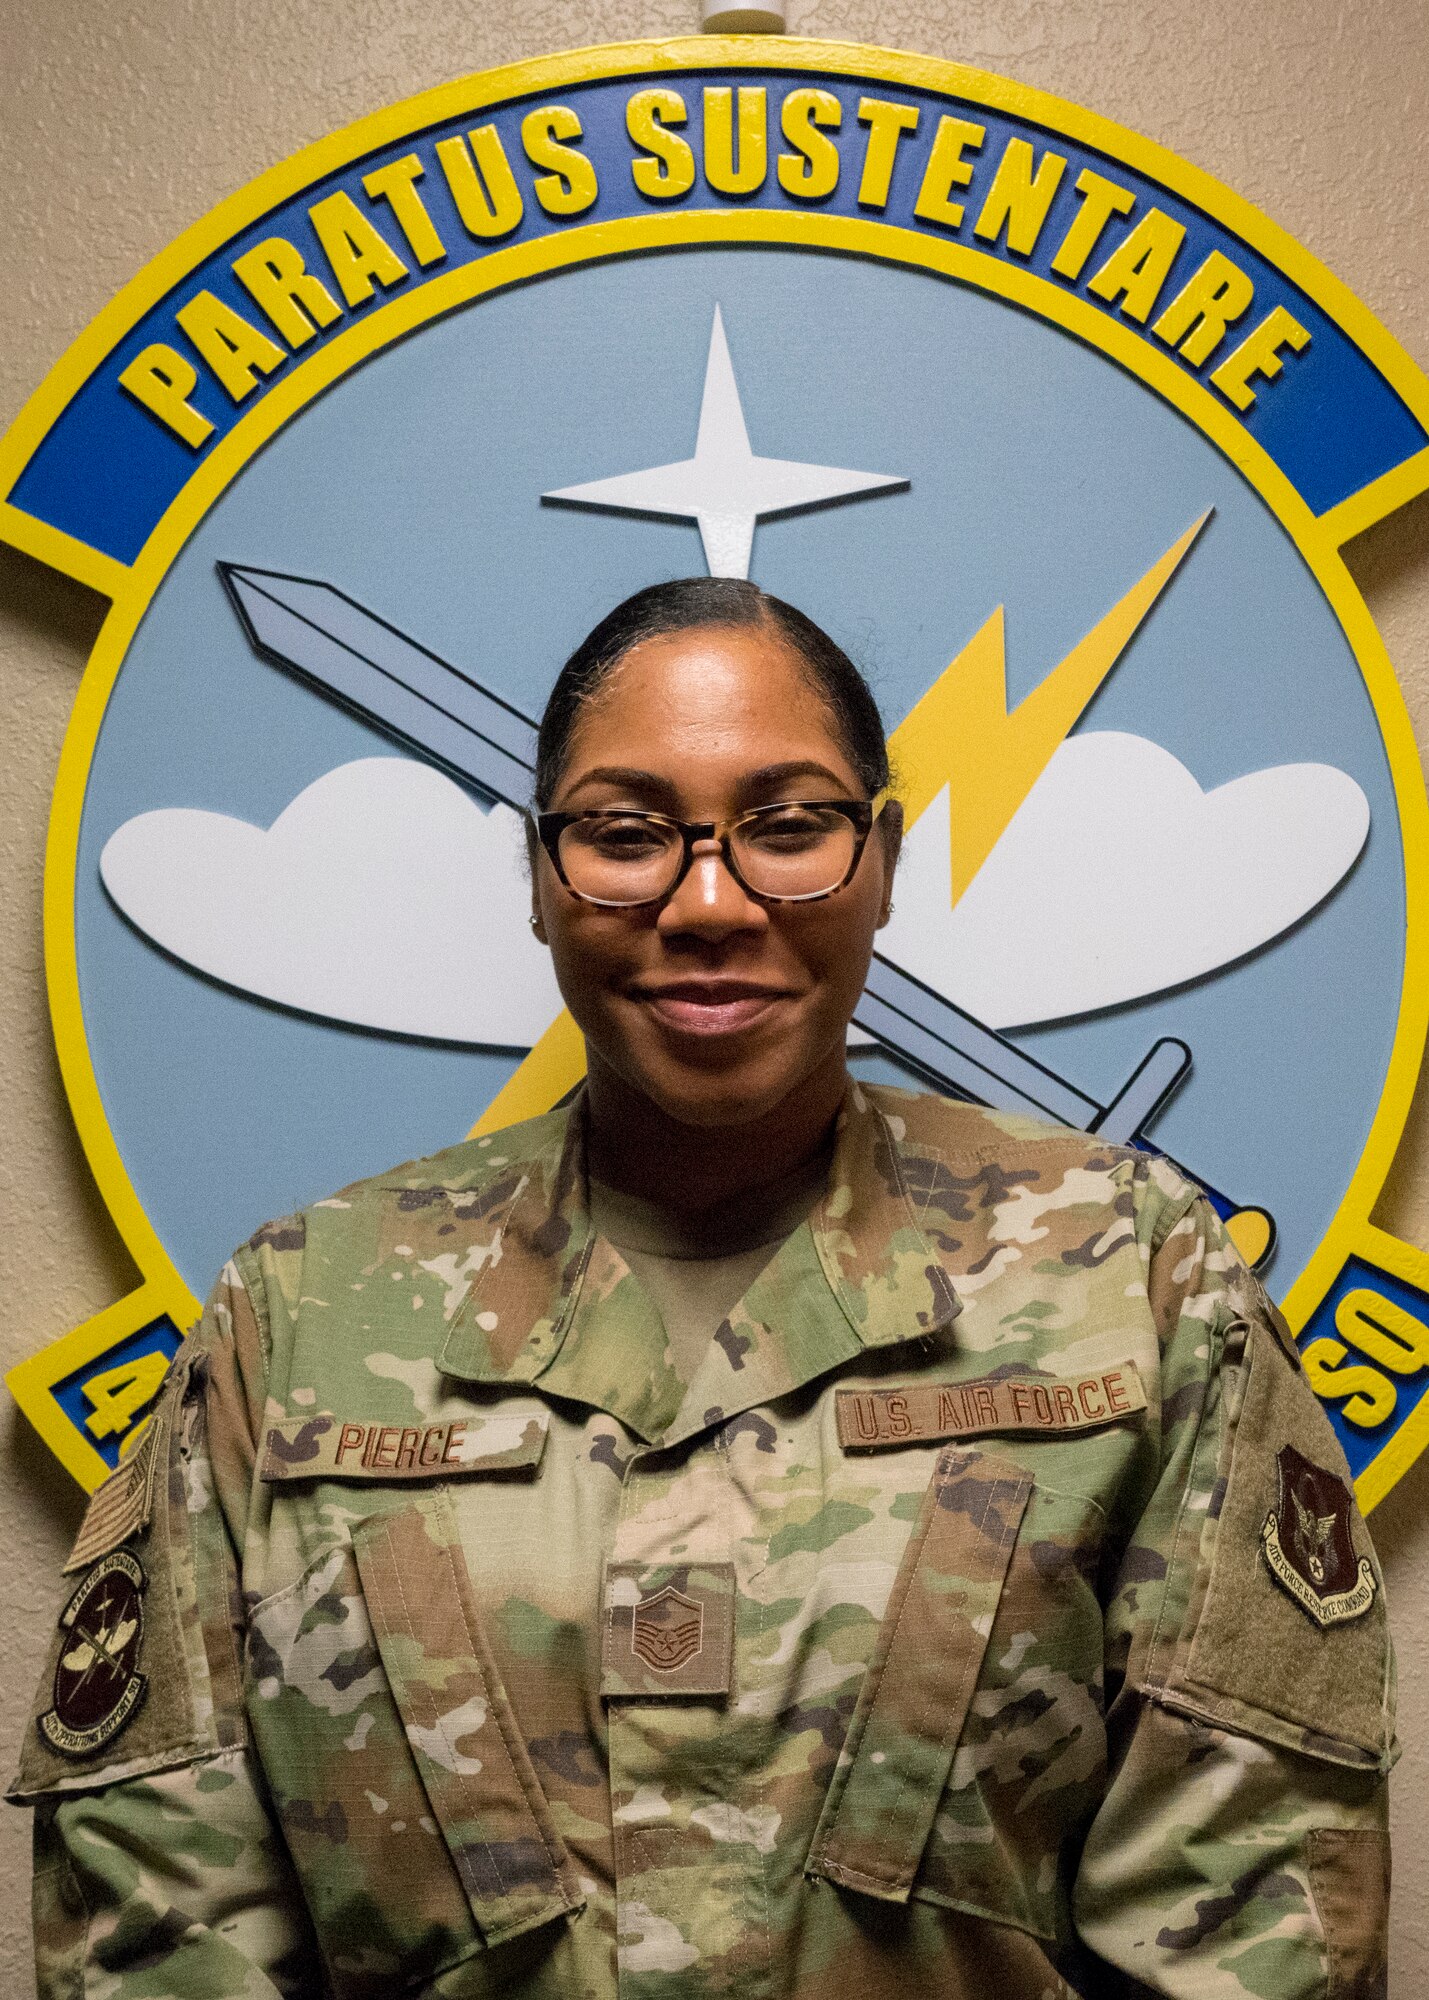 Master Sgt. Leatrice Pierce, 403rd Operations Support Squadron aircrew flight equipment, was selected as the 403rd Wing’s first quarter award winner in the civilian category II. (U.S. Air Force photo by Tech. Sgt. Christopher Carranza)